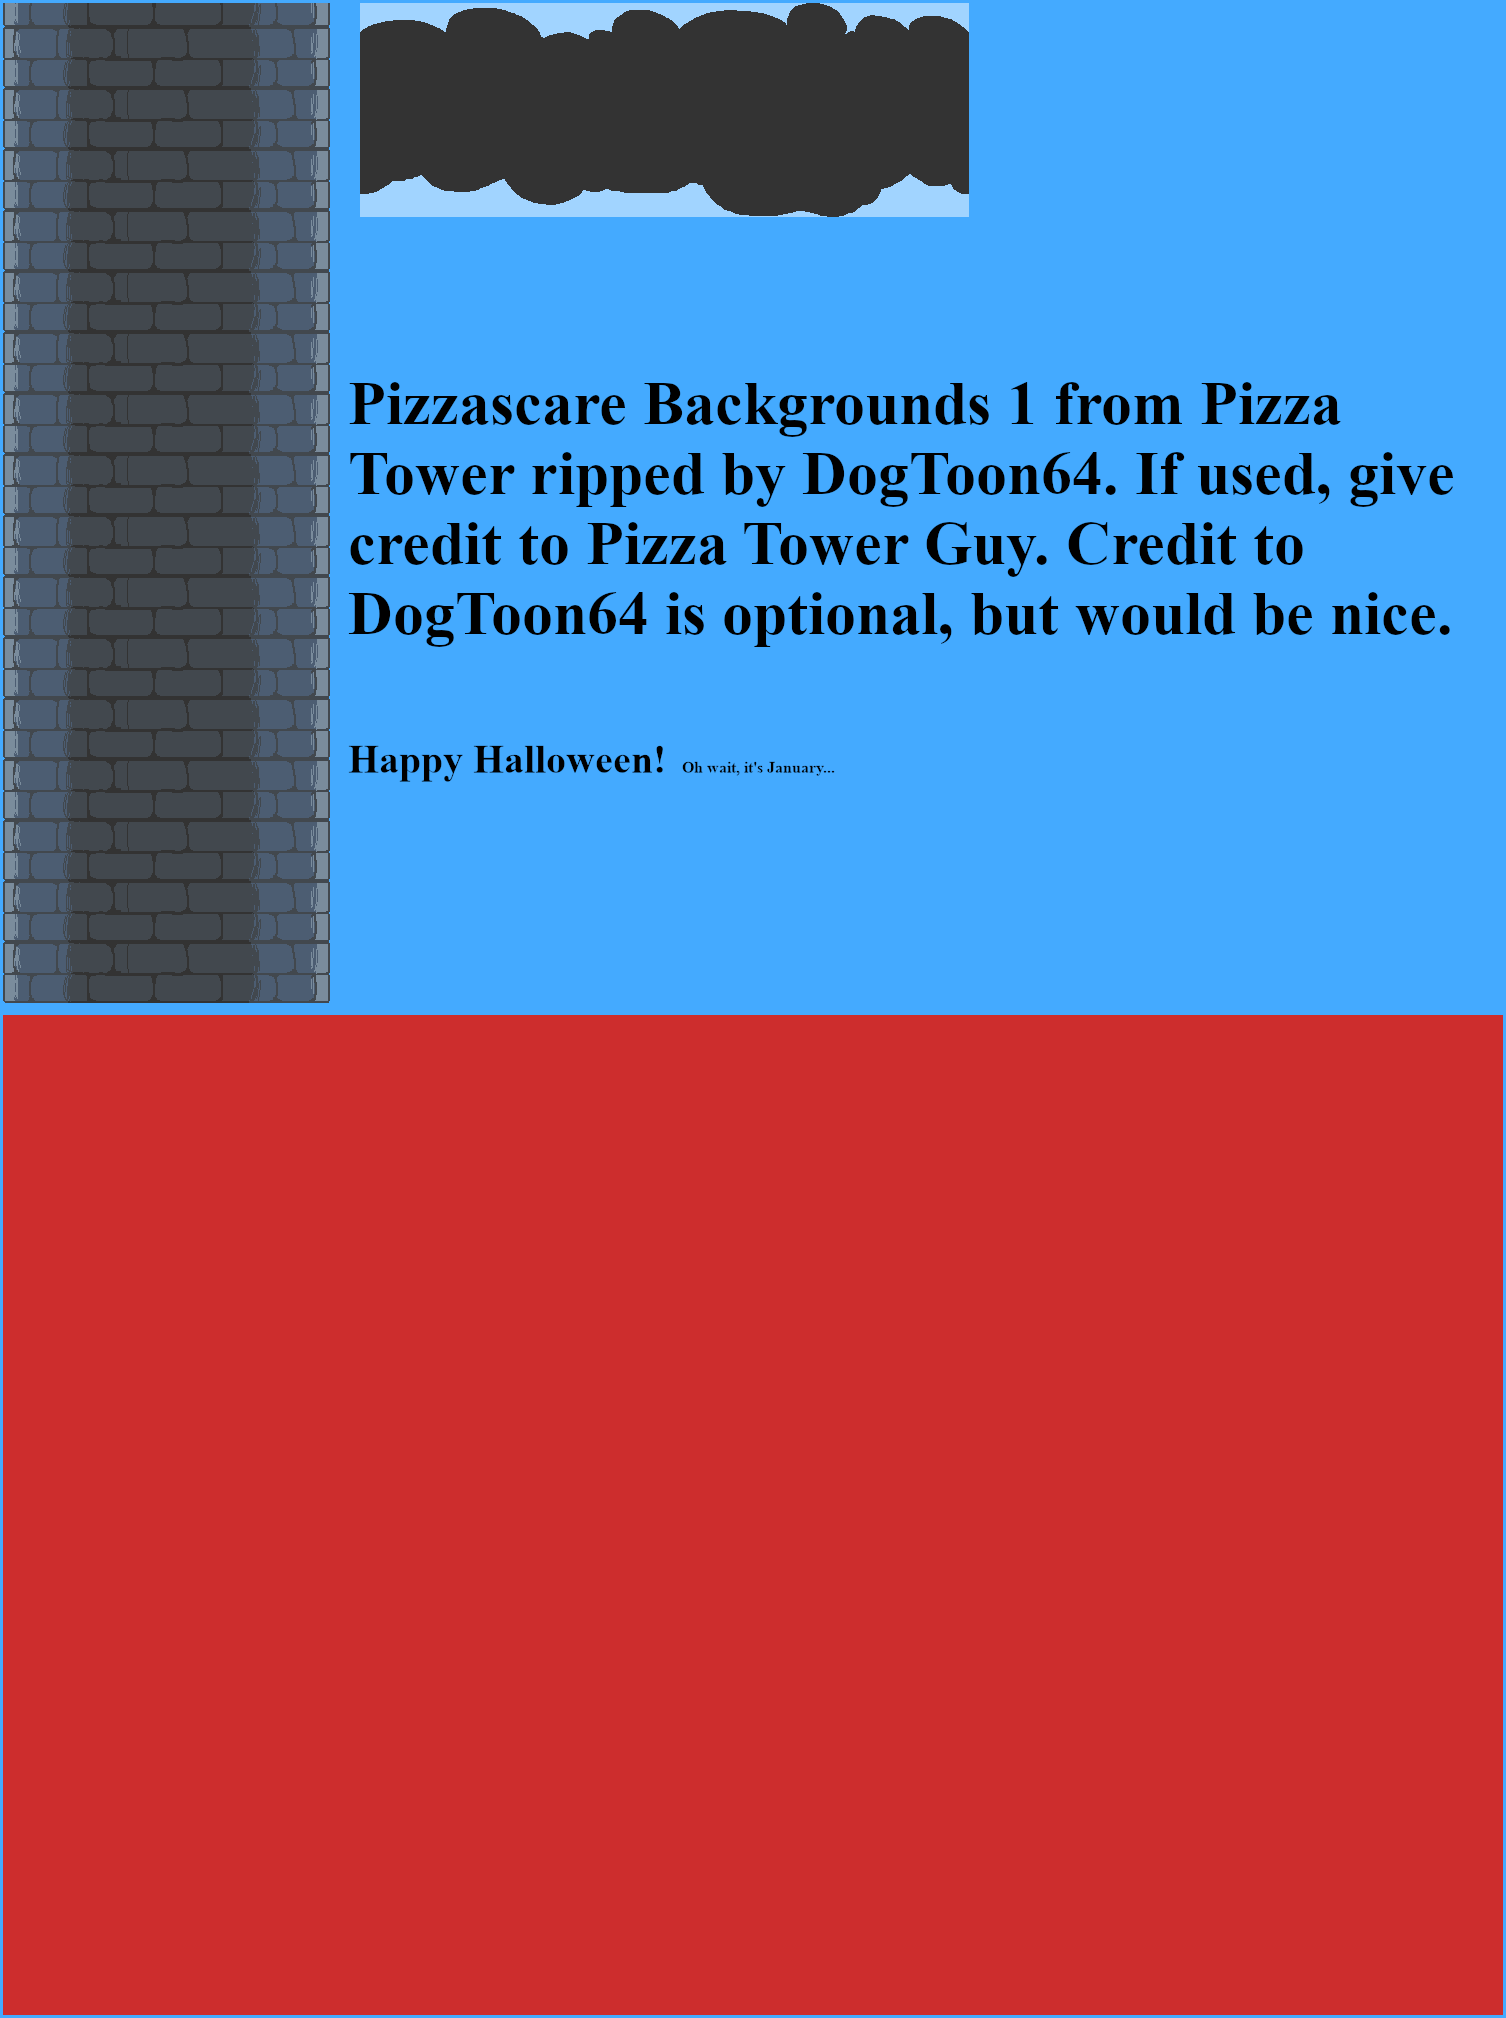 Pizza Tower - Pizzascare Backgrounds 1 (Demo)